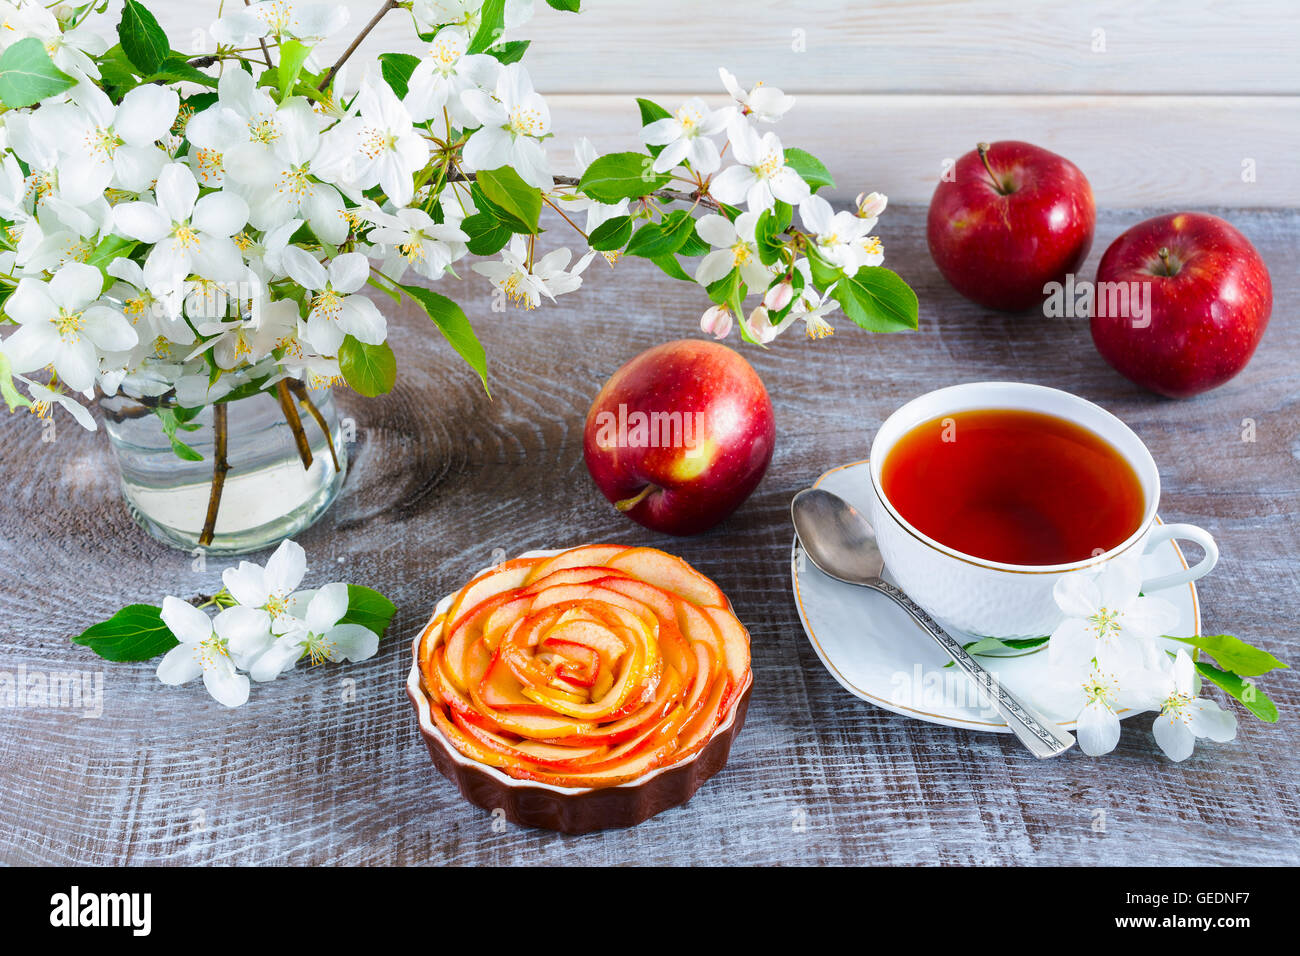 Apple rose shaped pie and cup of tea on wooden table. Homemade apple cake for tea time. Breakfast tea with sweet apple pastry. Stock Photo